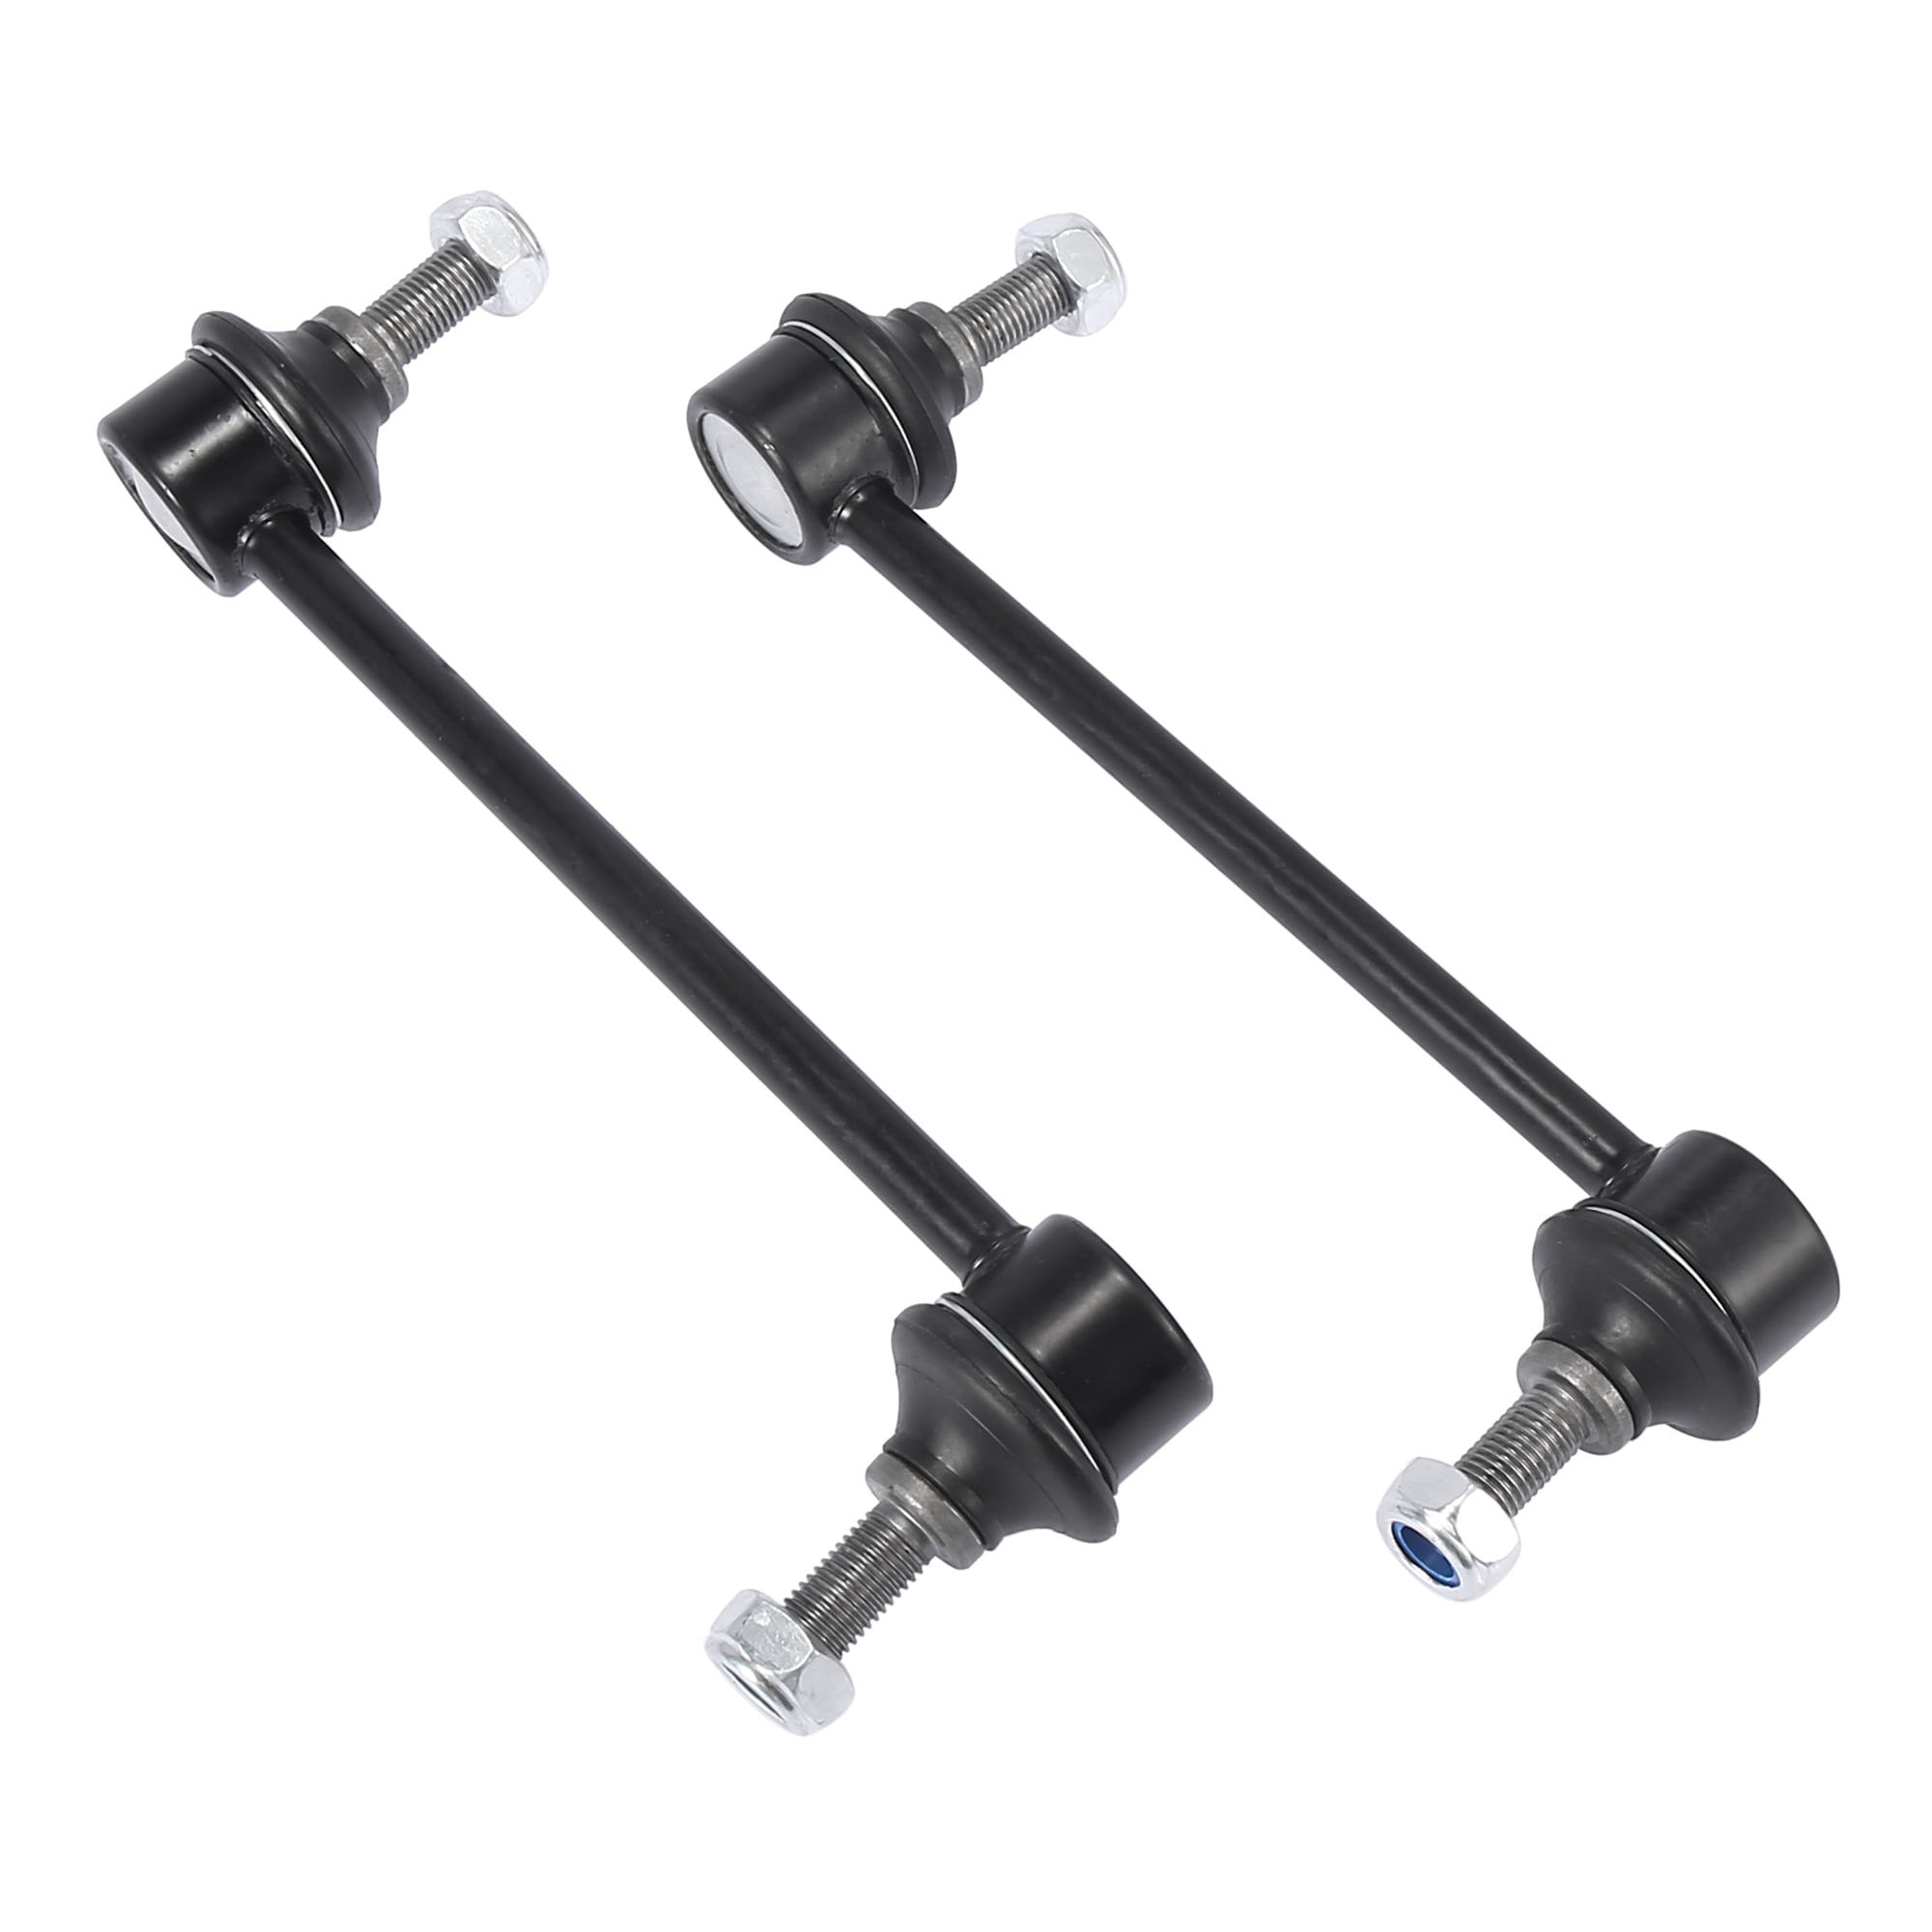 2 New Rear Stabilizer/Sway Bar End Links For 2000-2013 2014 Chevy Impala K6662